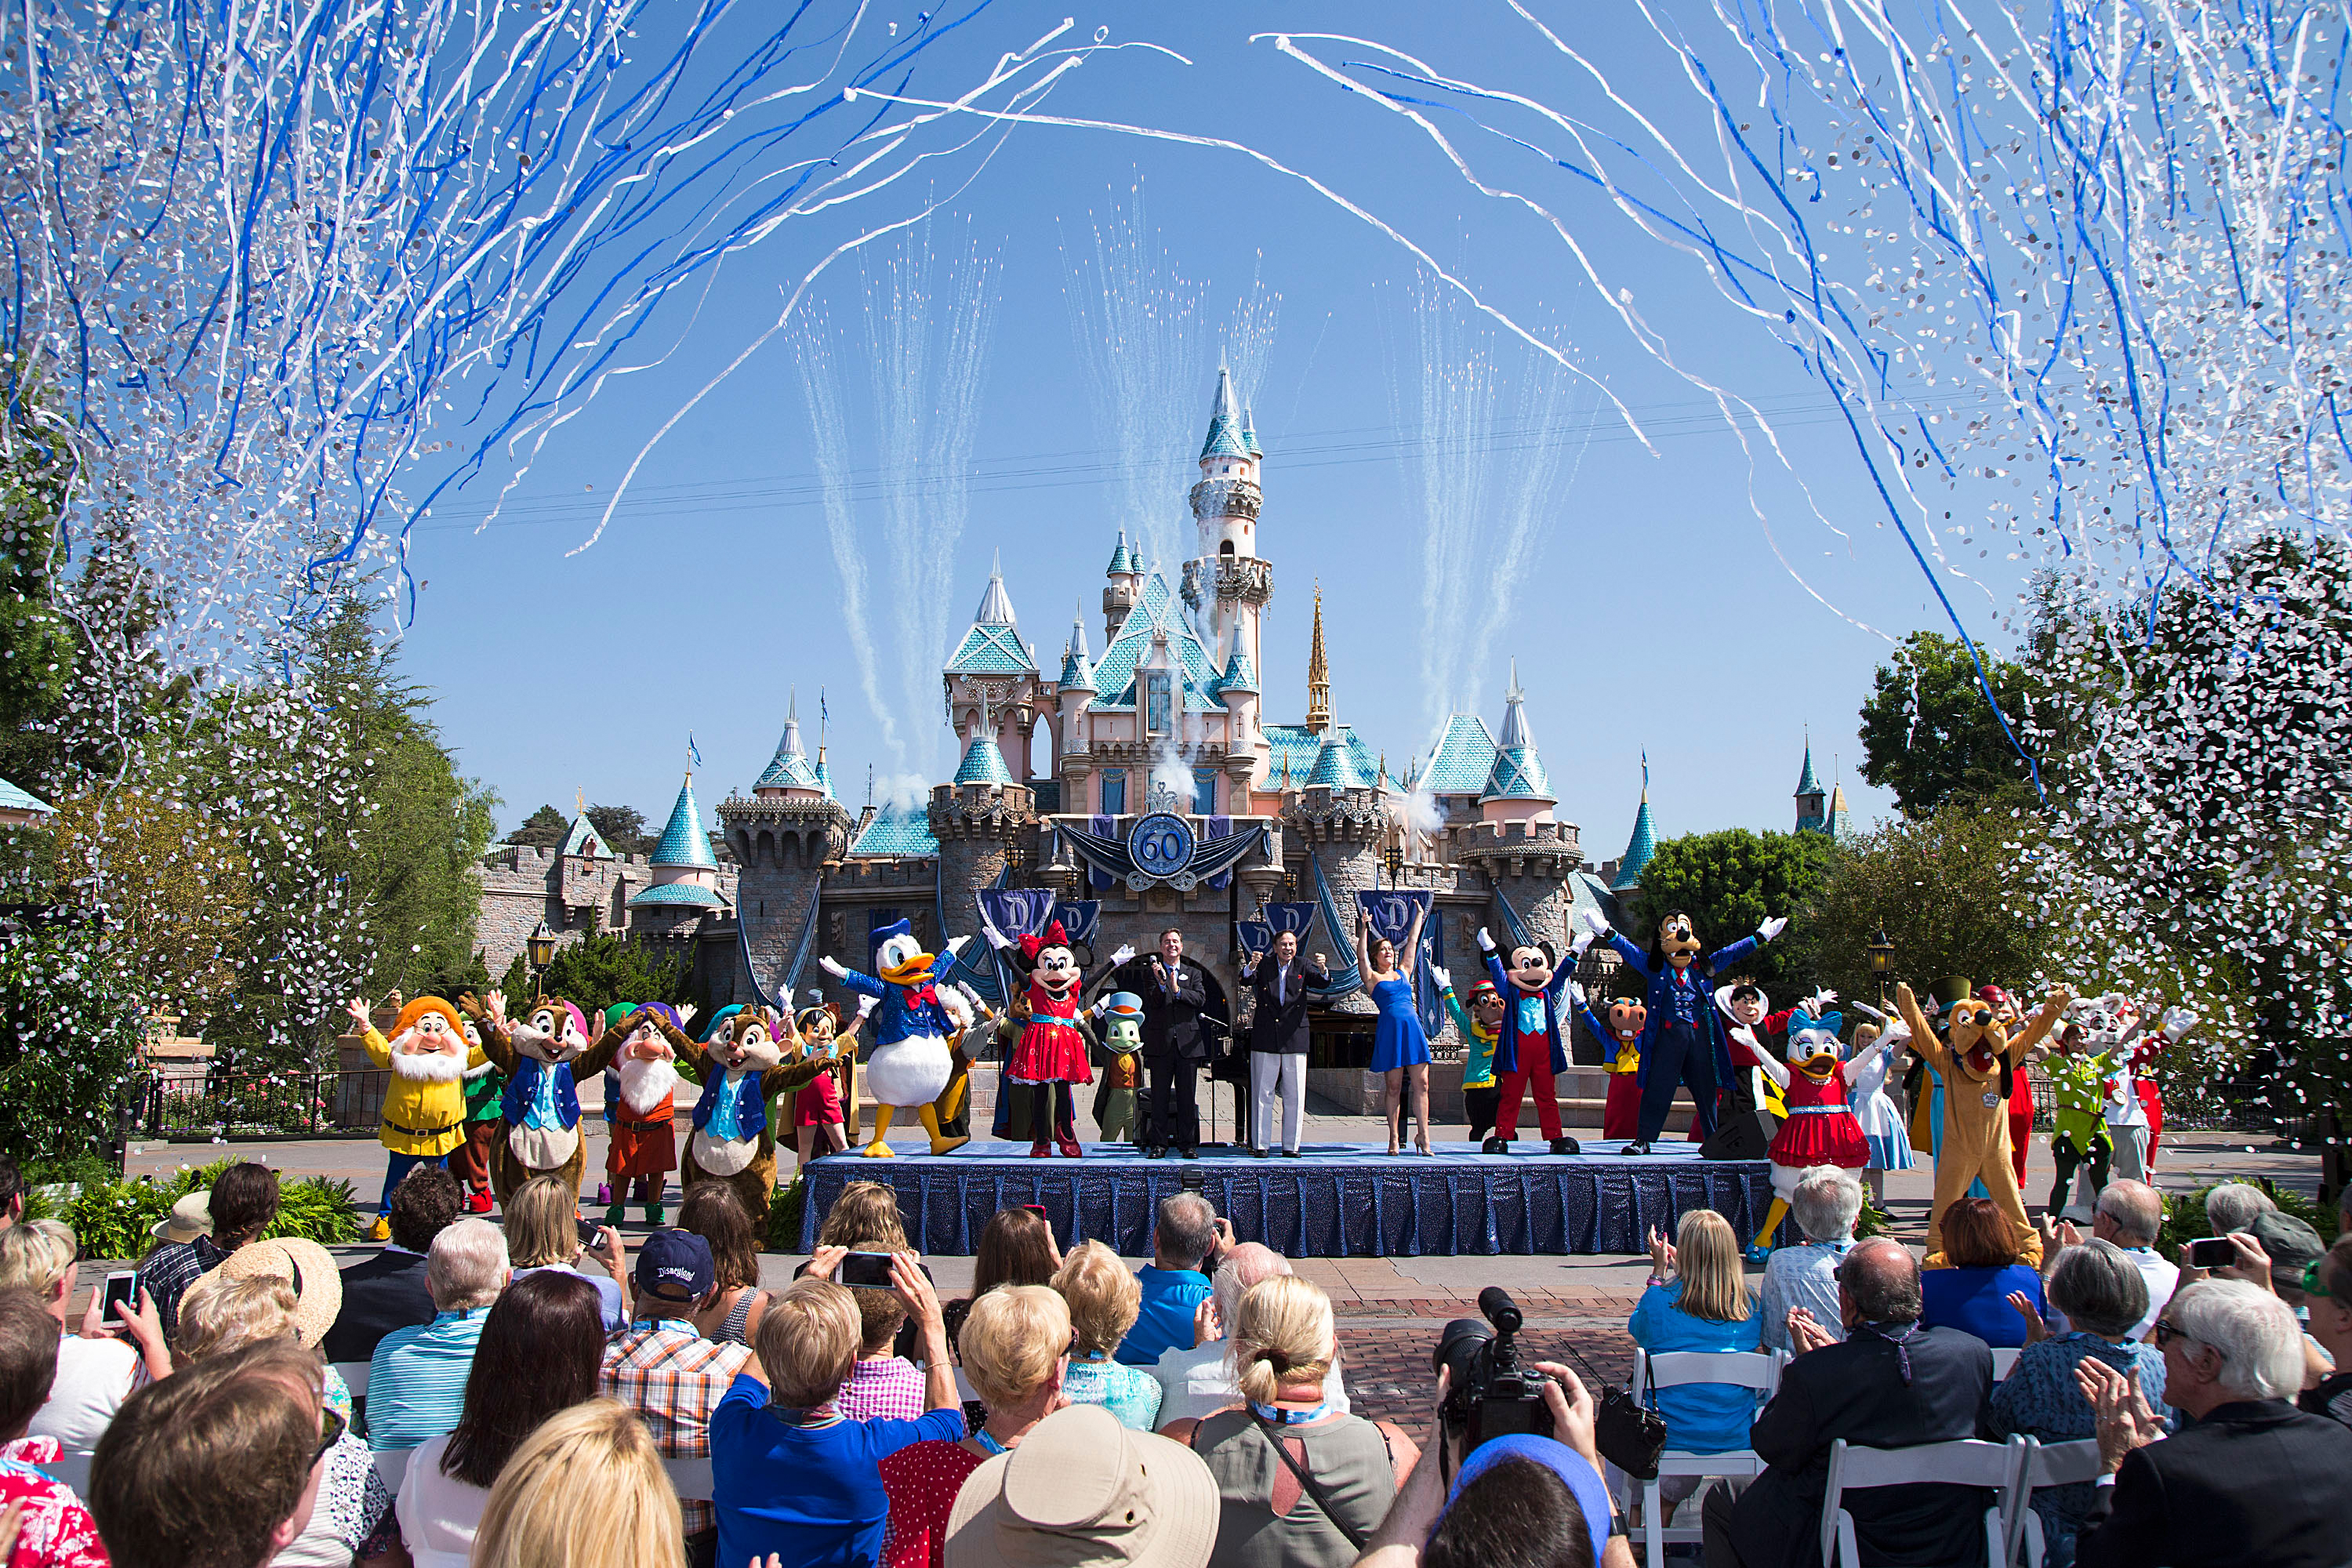 Mickey Mouse and friends celebrate the 60th anniversary of Disneyland on July 17, 2015 in Anaheim, California.